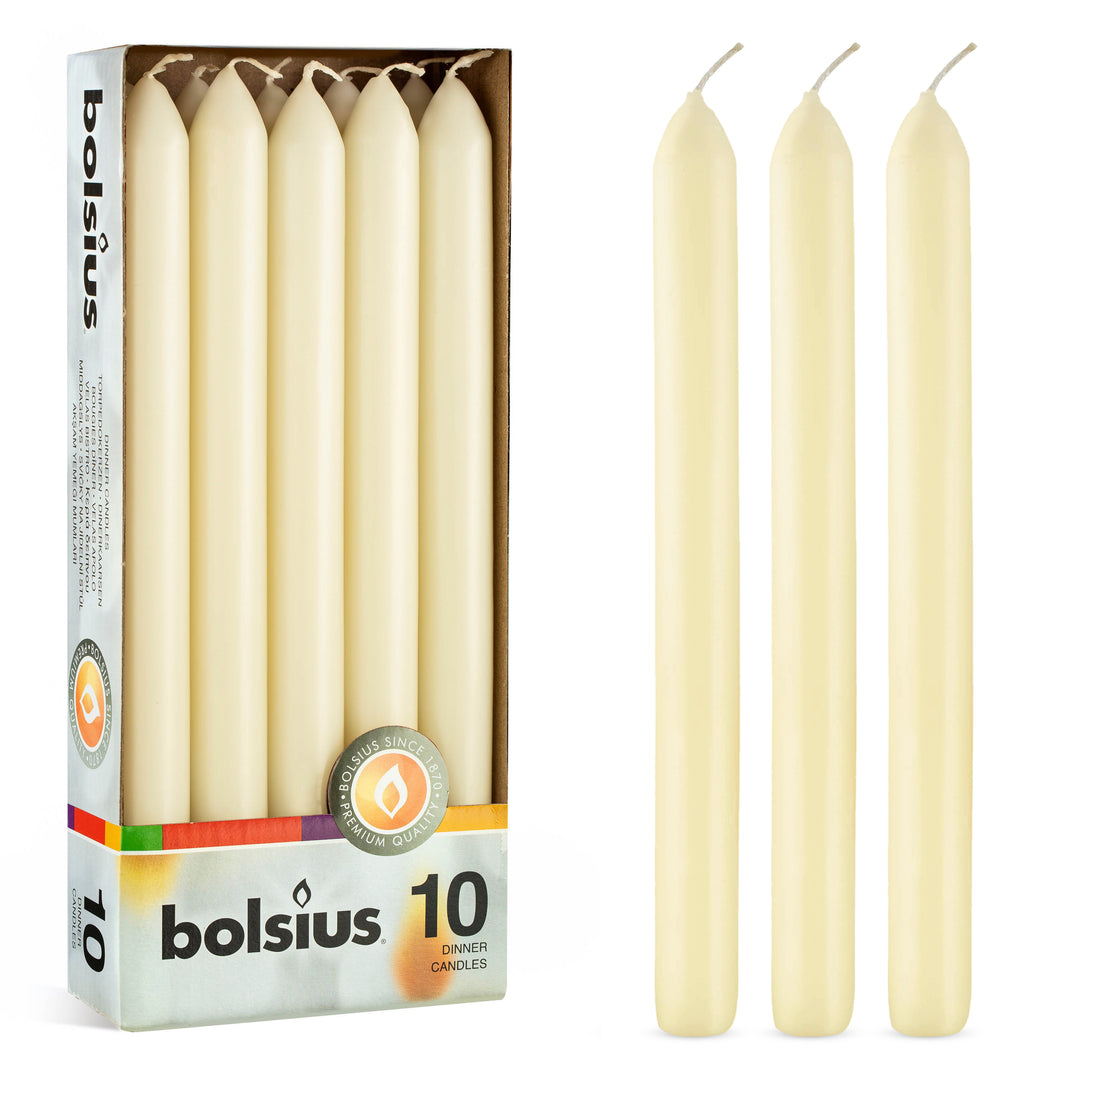 9" X 0.8" Classic Dinner Taper Candles - 10 Pack - Kisco Candles